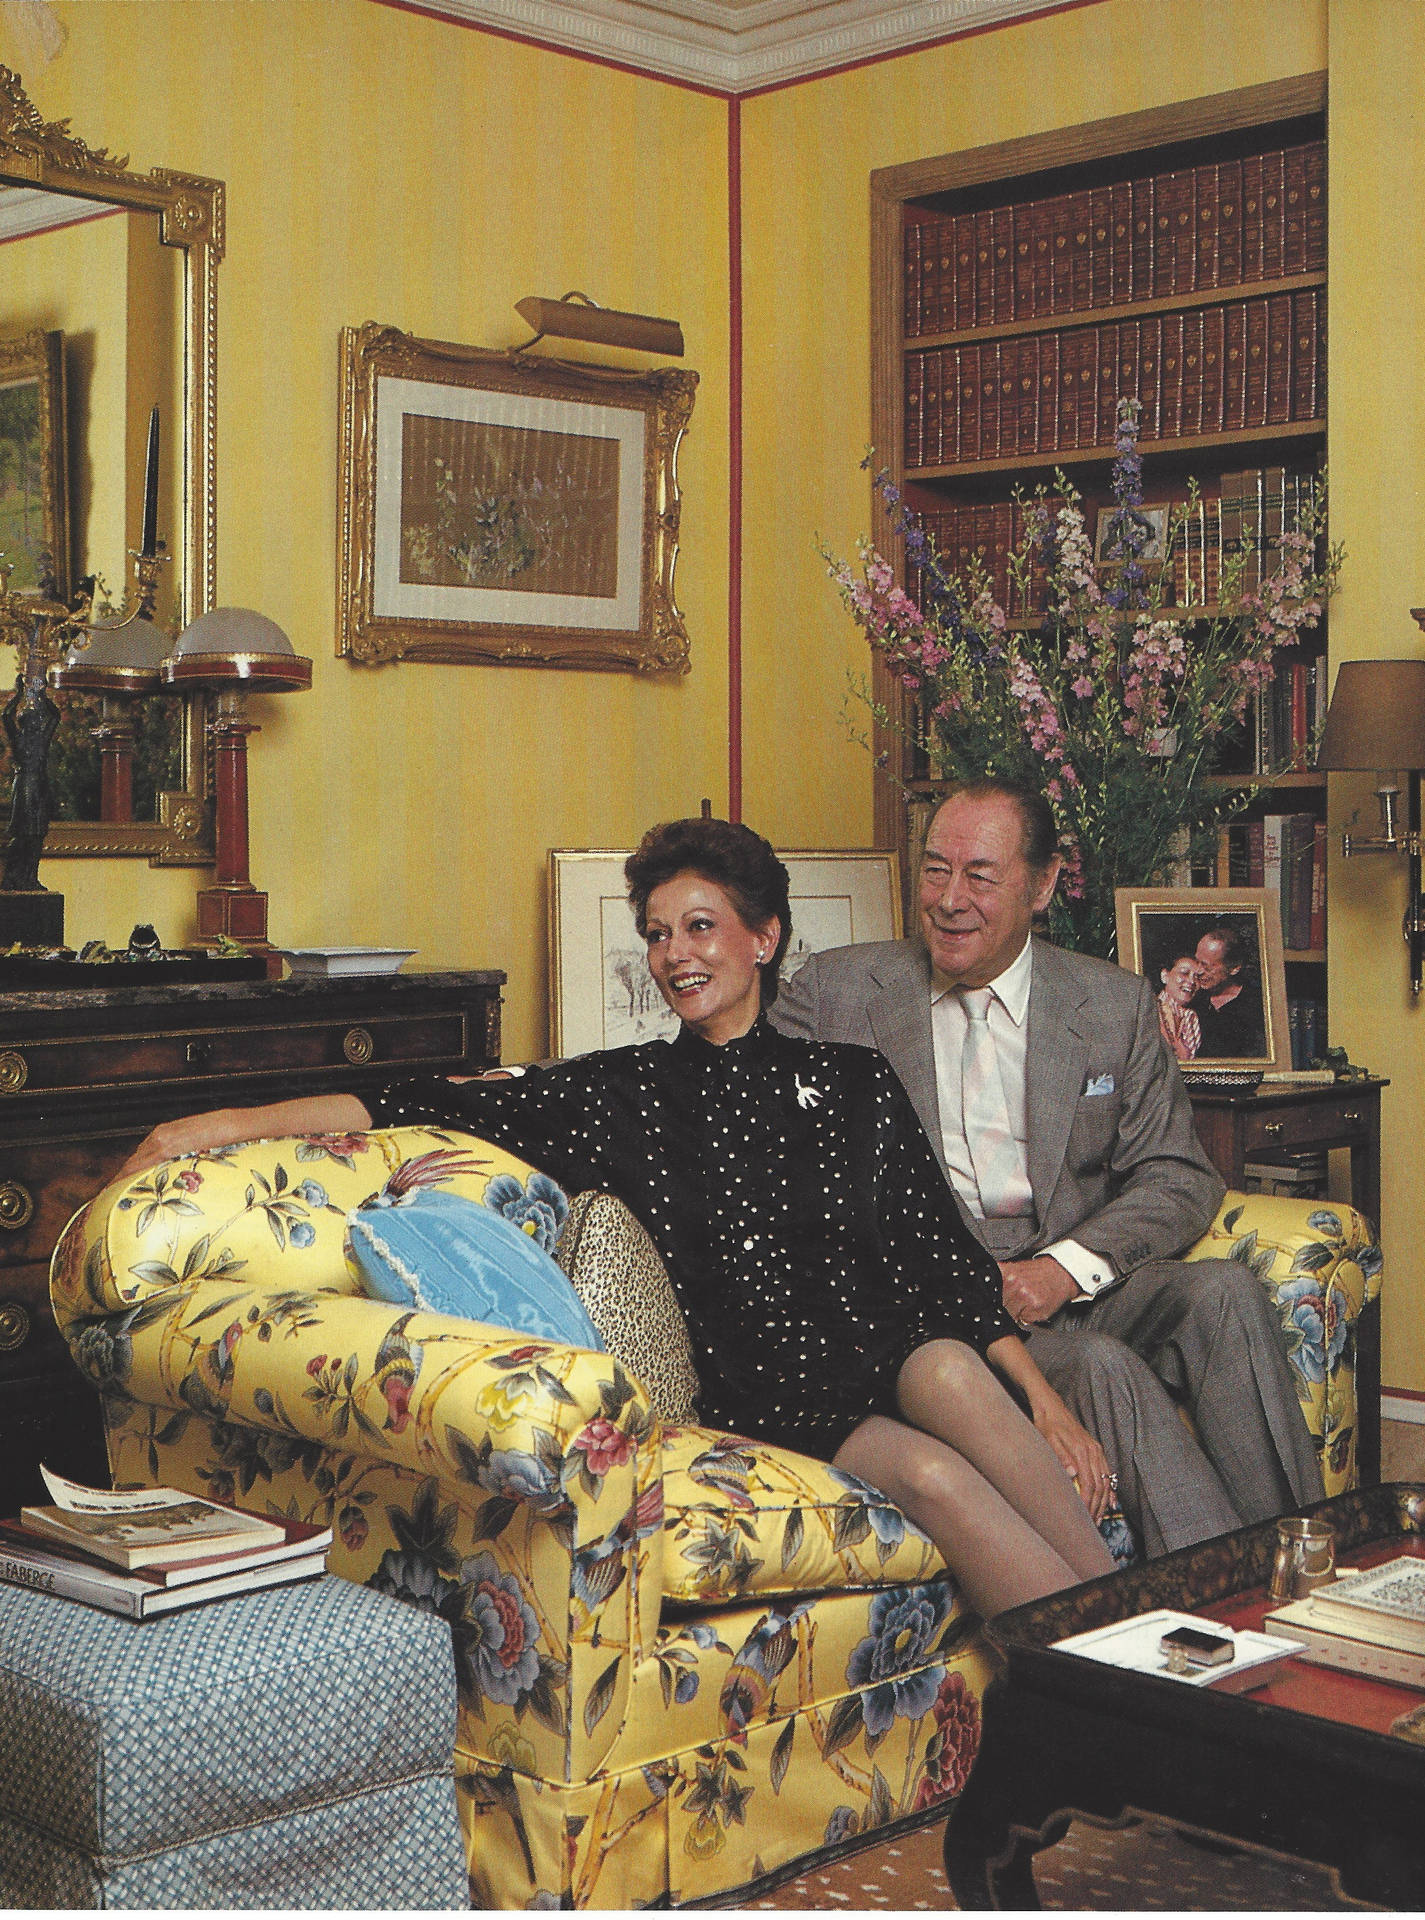 Rex Harrison and His Wife at Their Welcoming Home Wallpaper